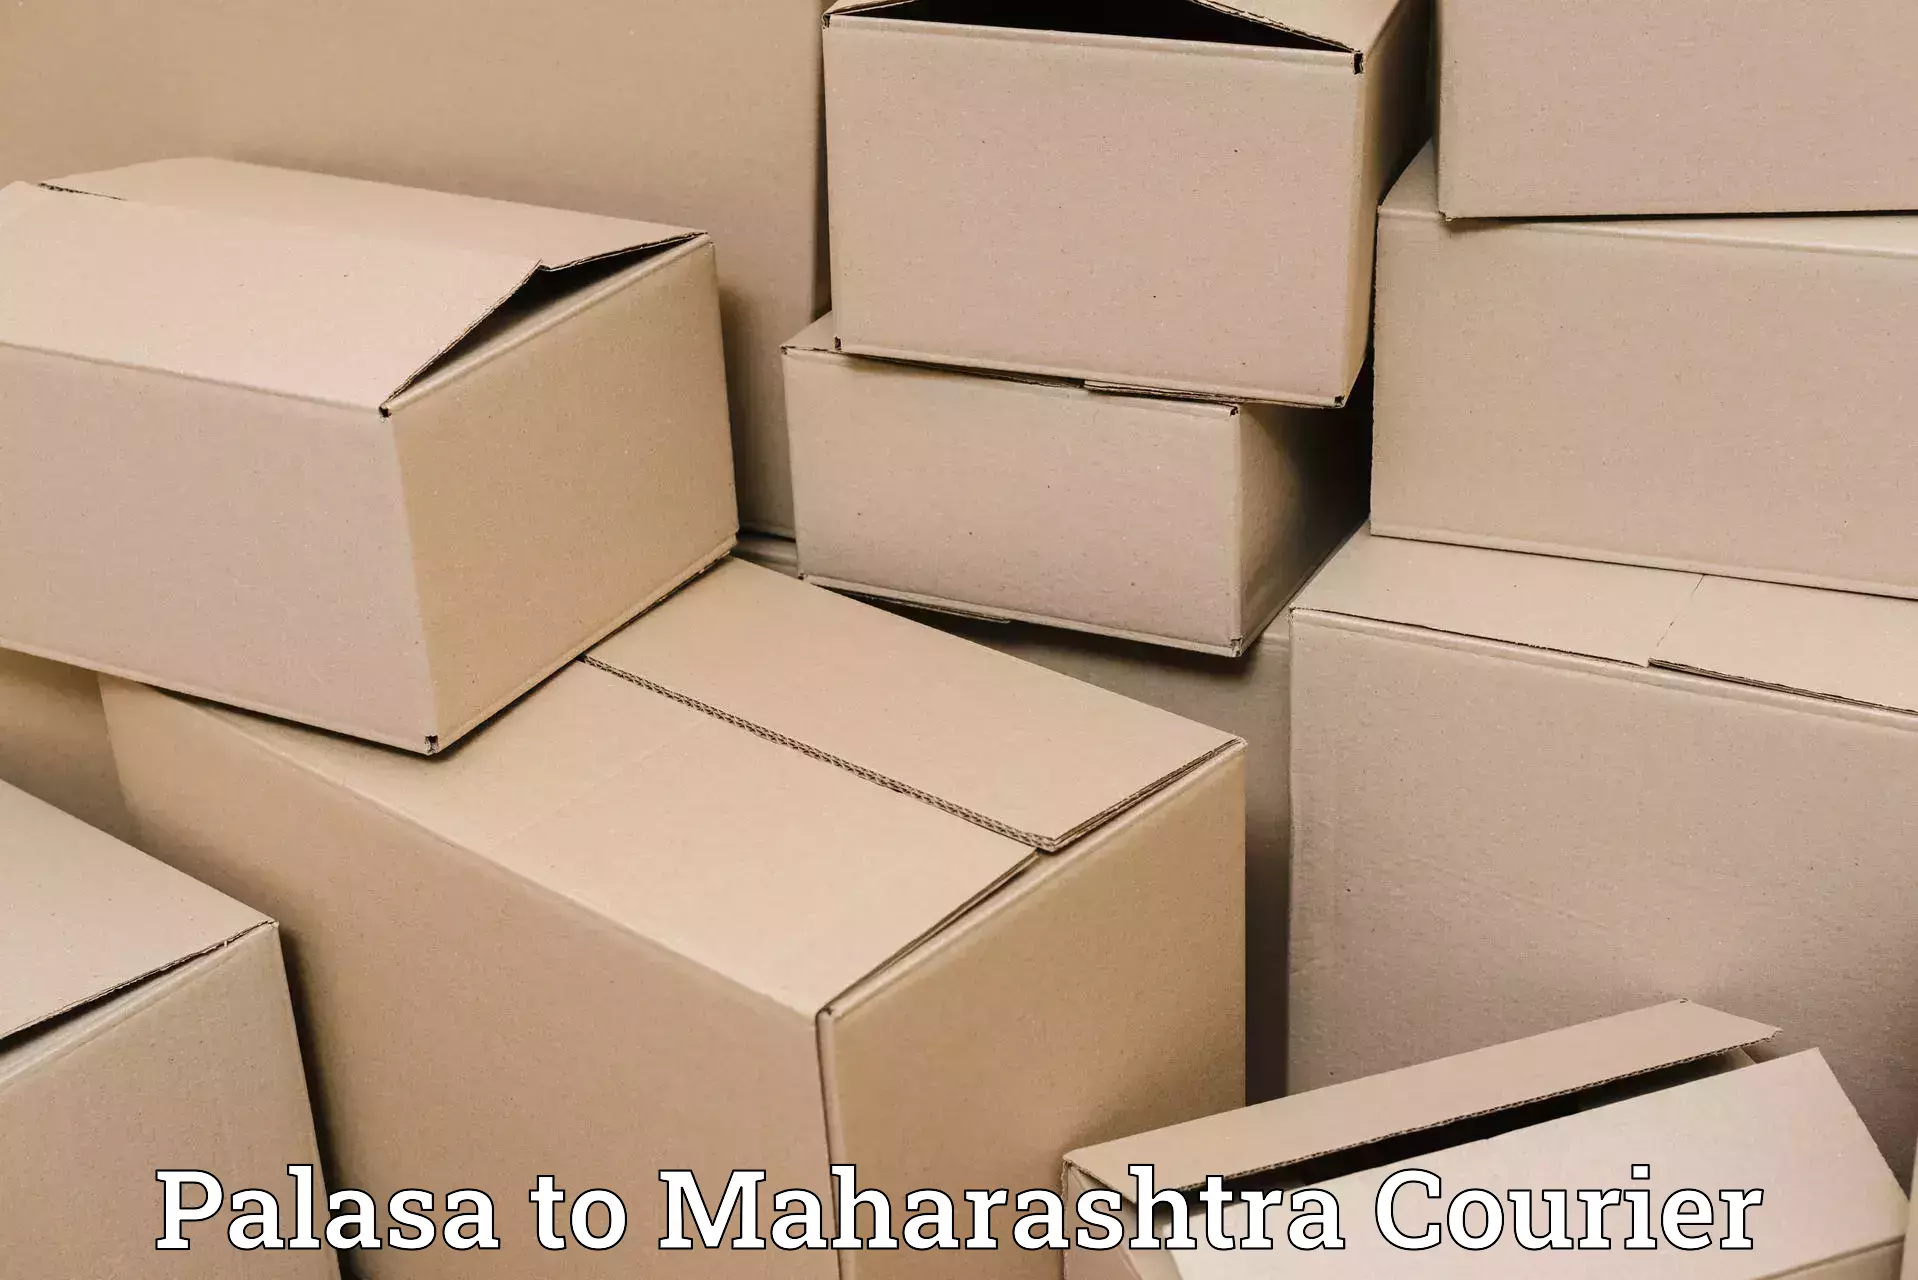 Flexible delivery scheduling Palasa to Tata Institute of Social Sciences Mumbai